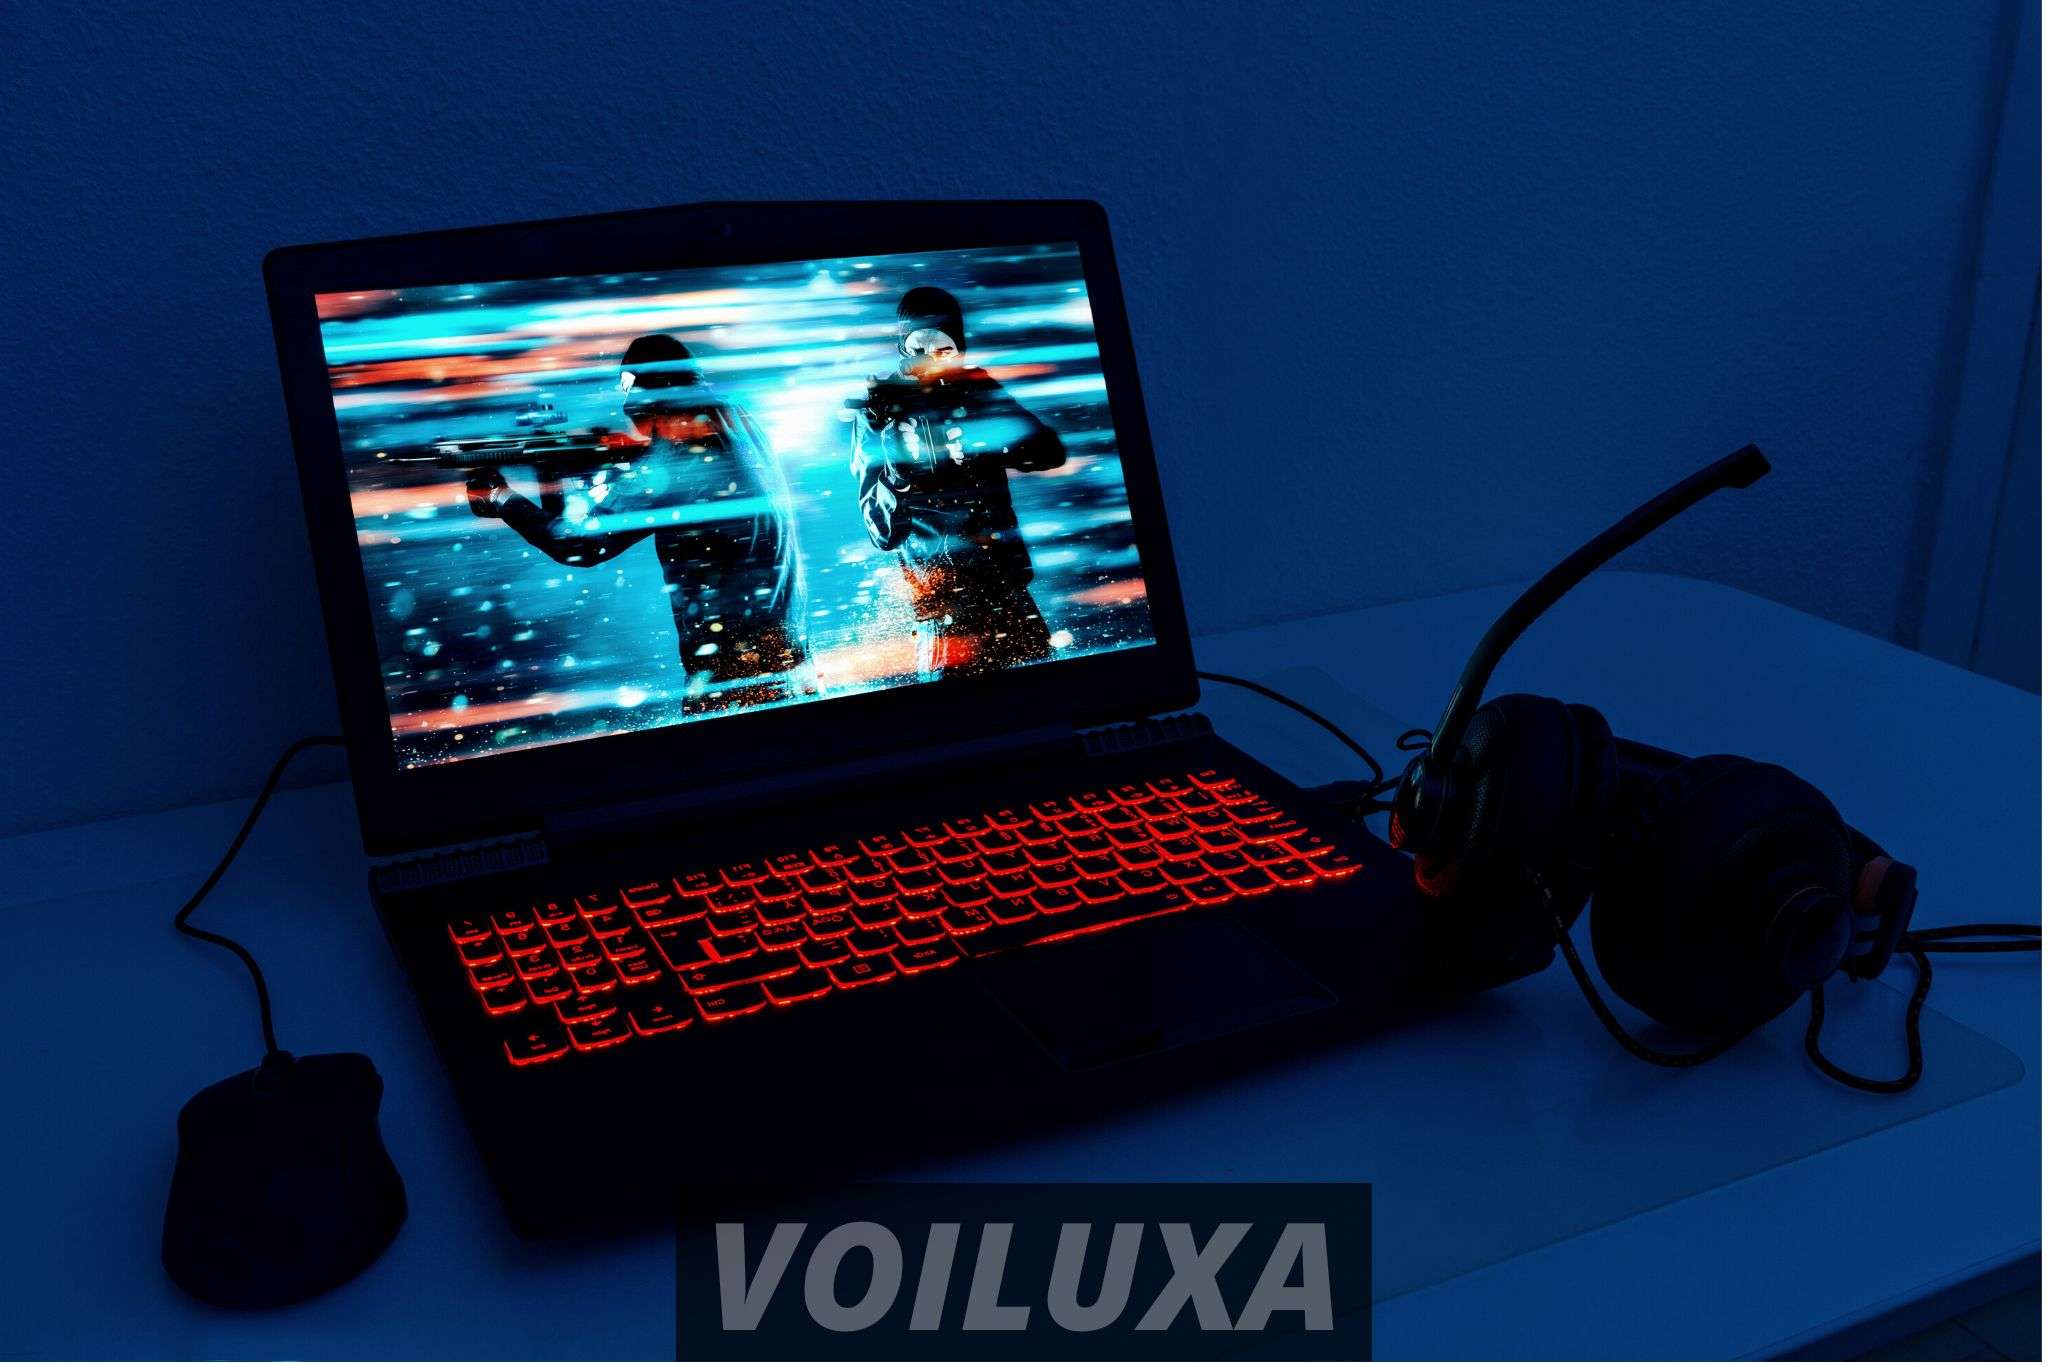 10 Most Expensive Gaming Laptop in the World in 2022